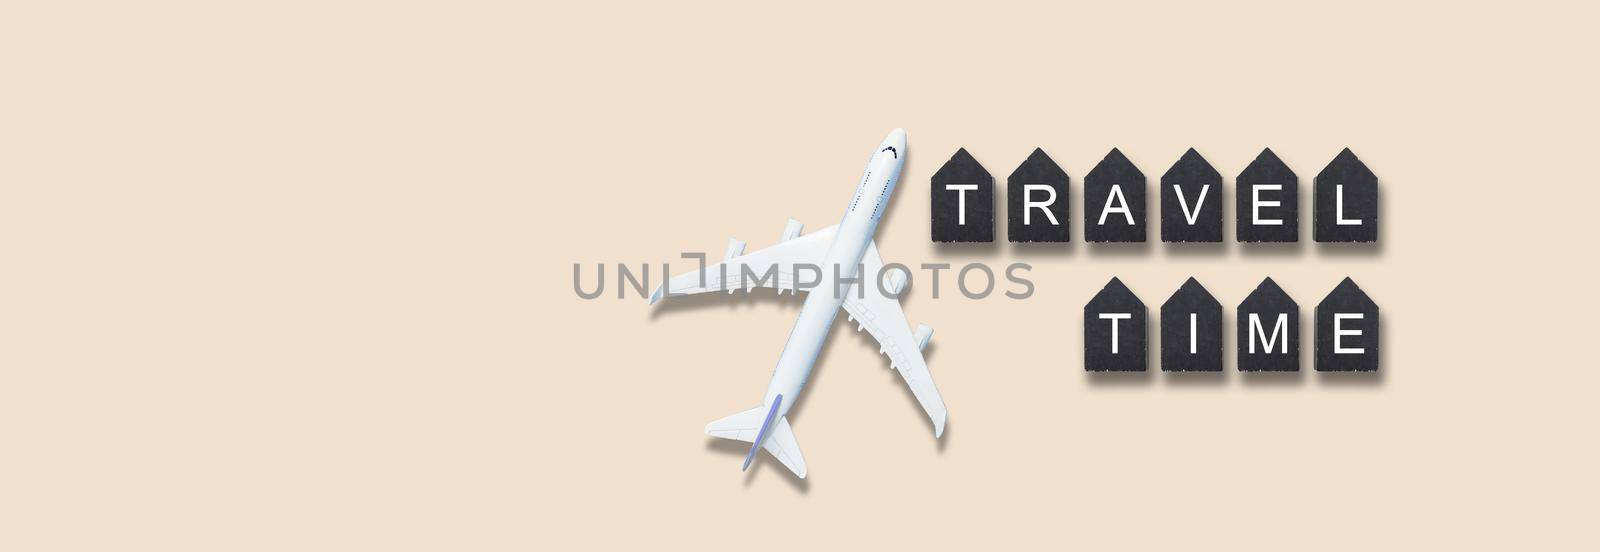 Airplane model. White plane on background. Travel vacation concept. Summer background. Flat lay, top view, copy space. High quality photo